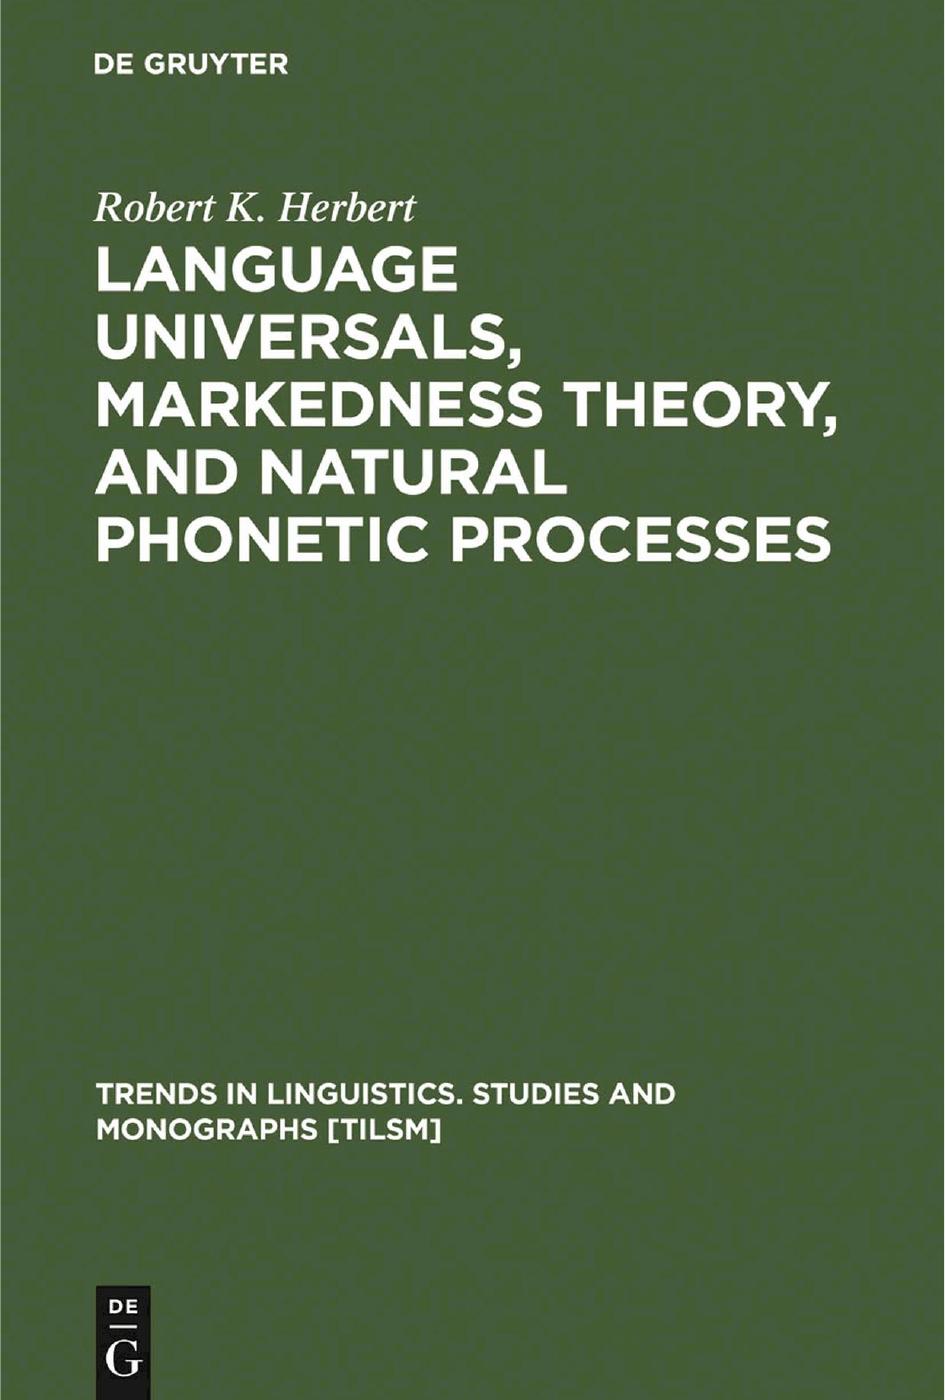 Language Universals, Markedness Theory, and Natural Phonetic Processes